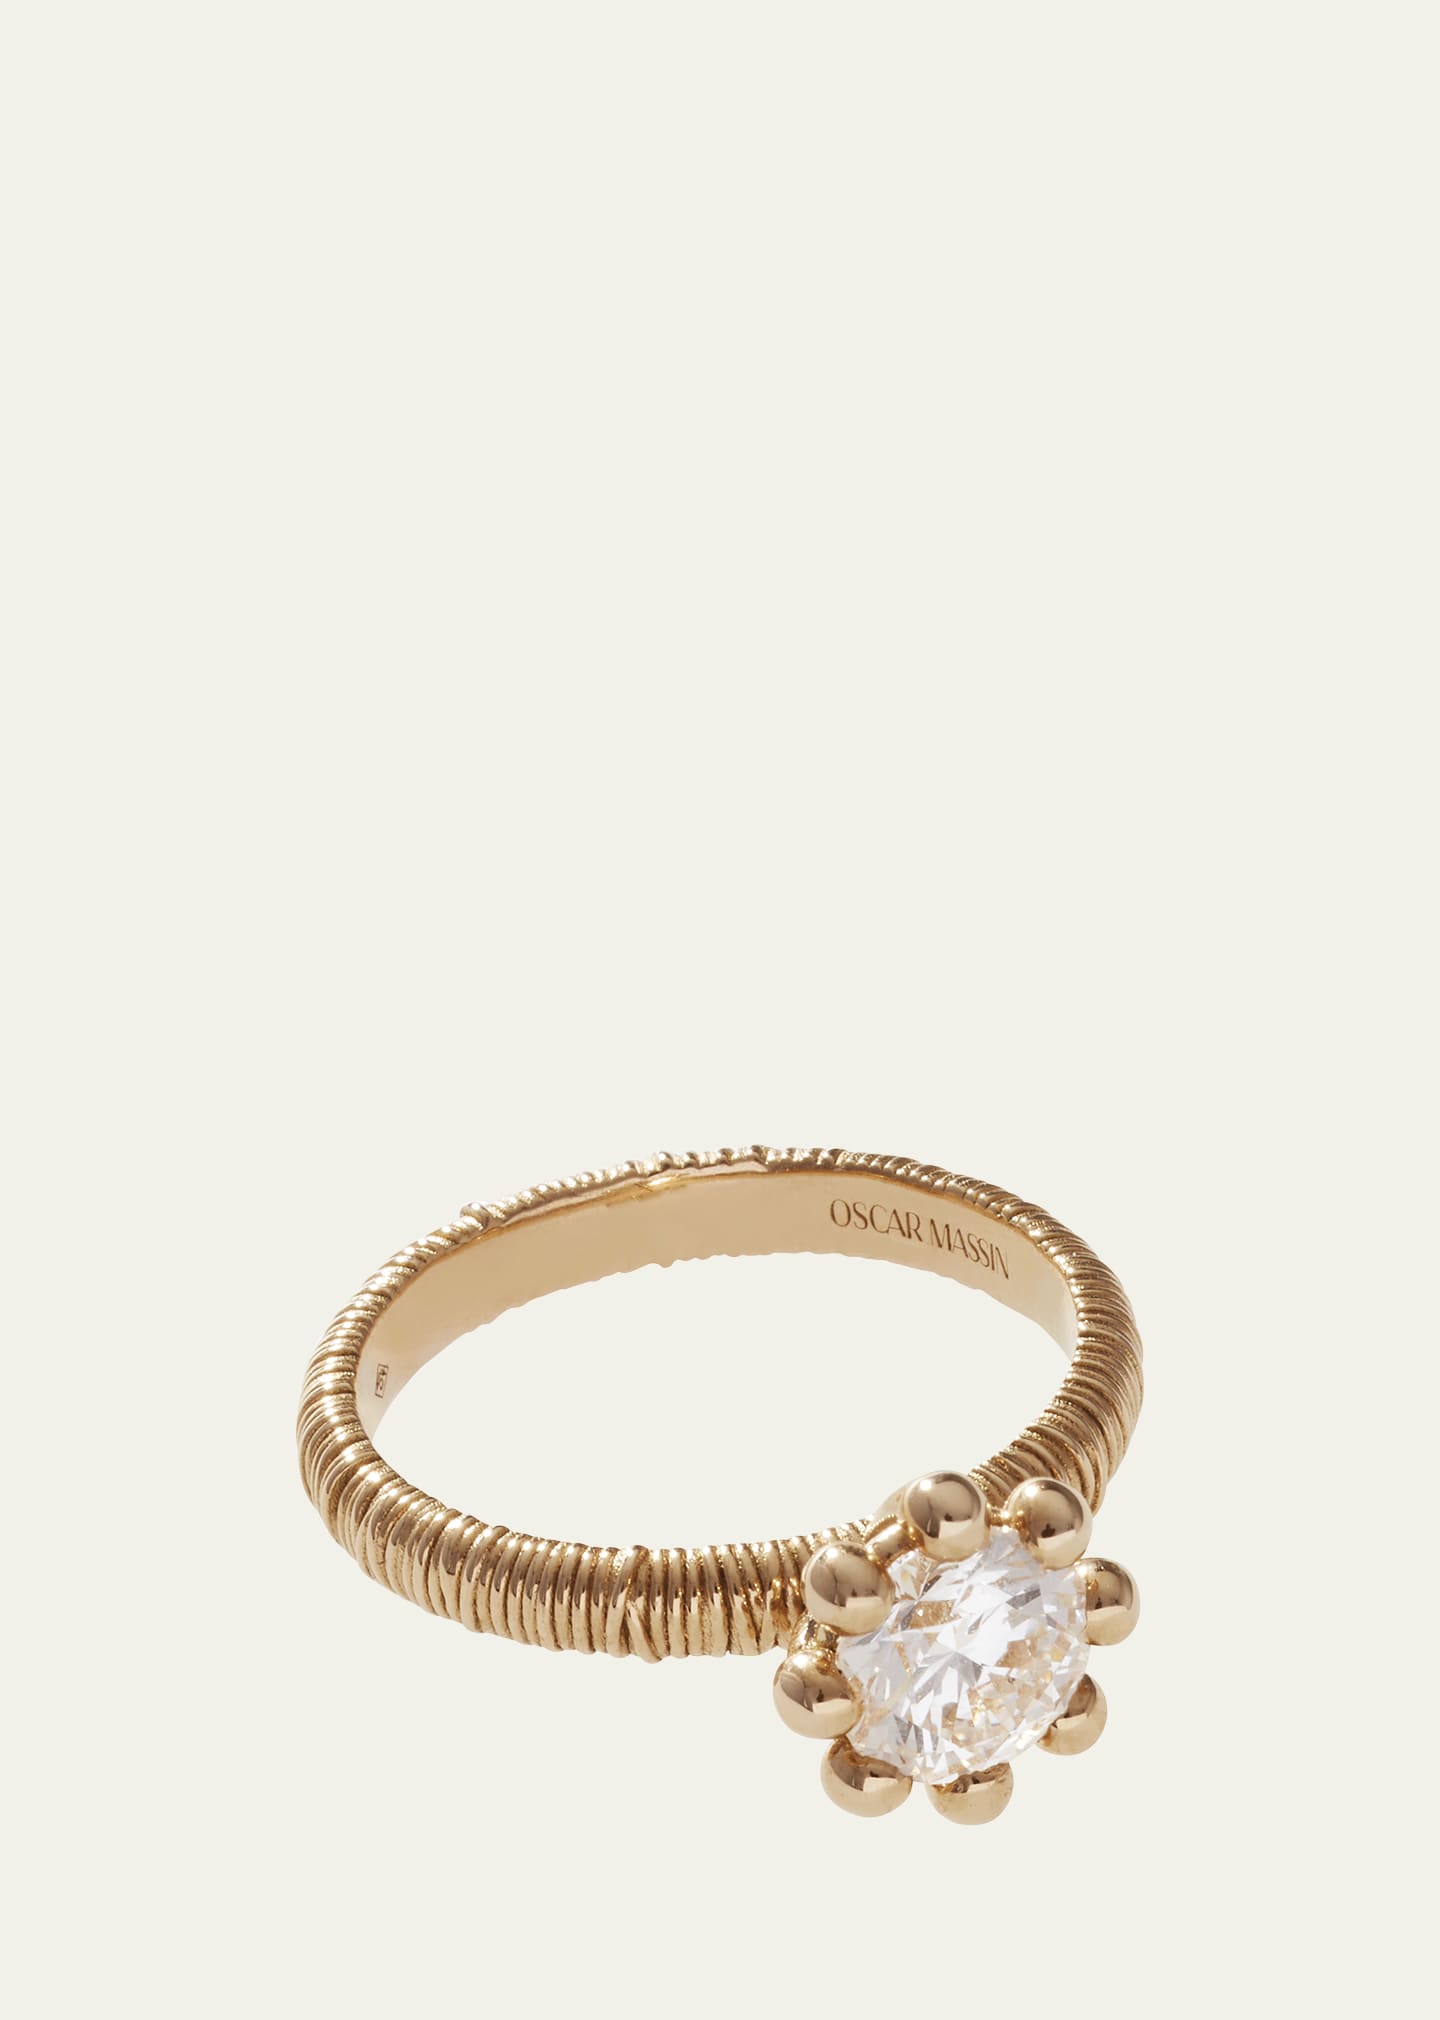 Lace Flower 18K Recycled Yellow Gold and Lab Grown Diamond Large Ring